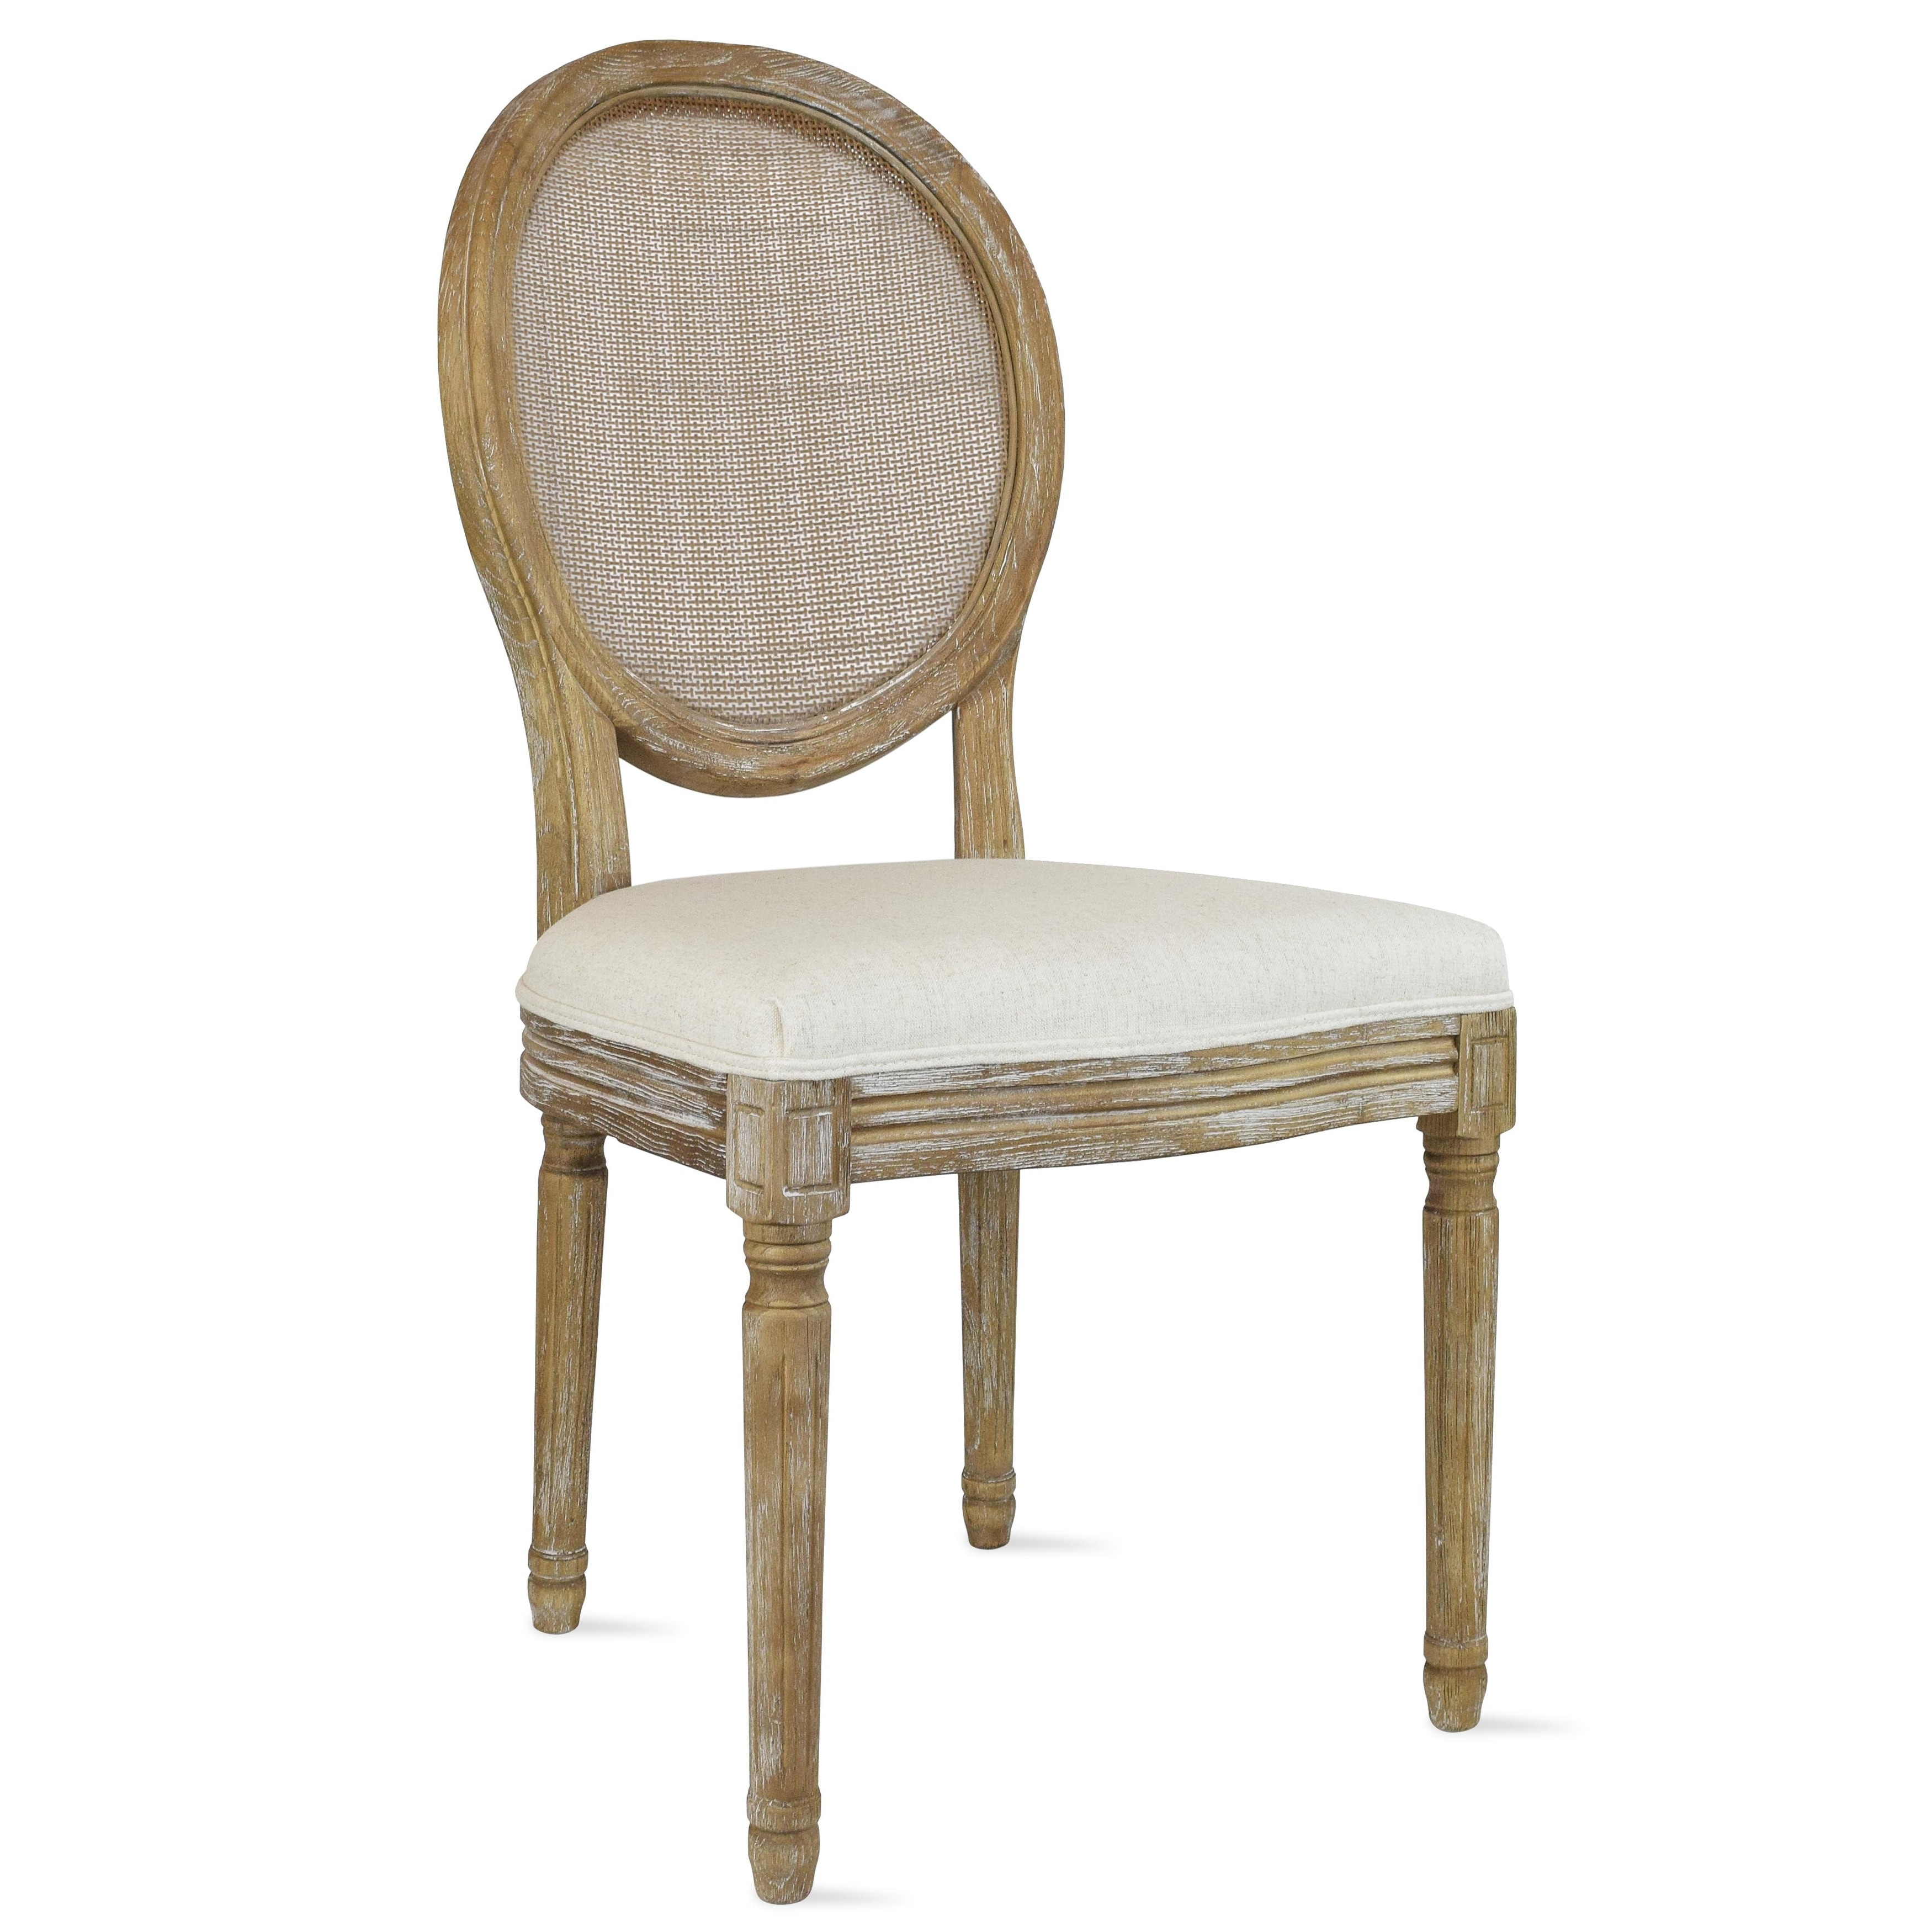 King Louis Back Side Chair Set of 2 French Country Dining Chairs Upholstered Linen Dining Room Chairs,Beige